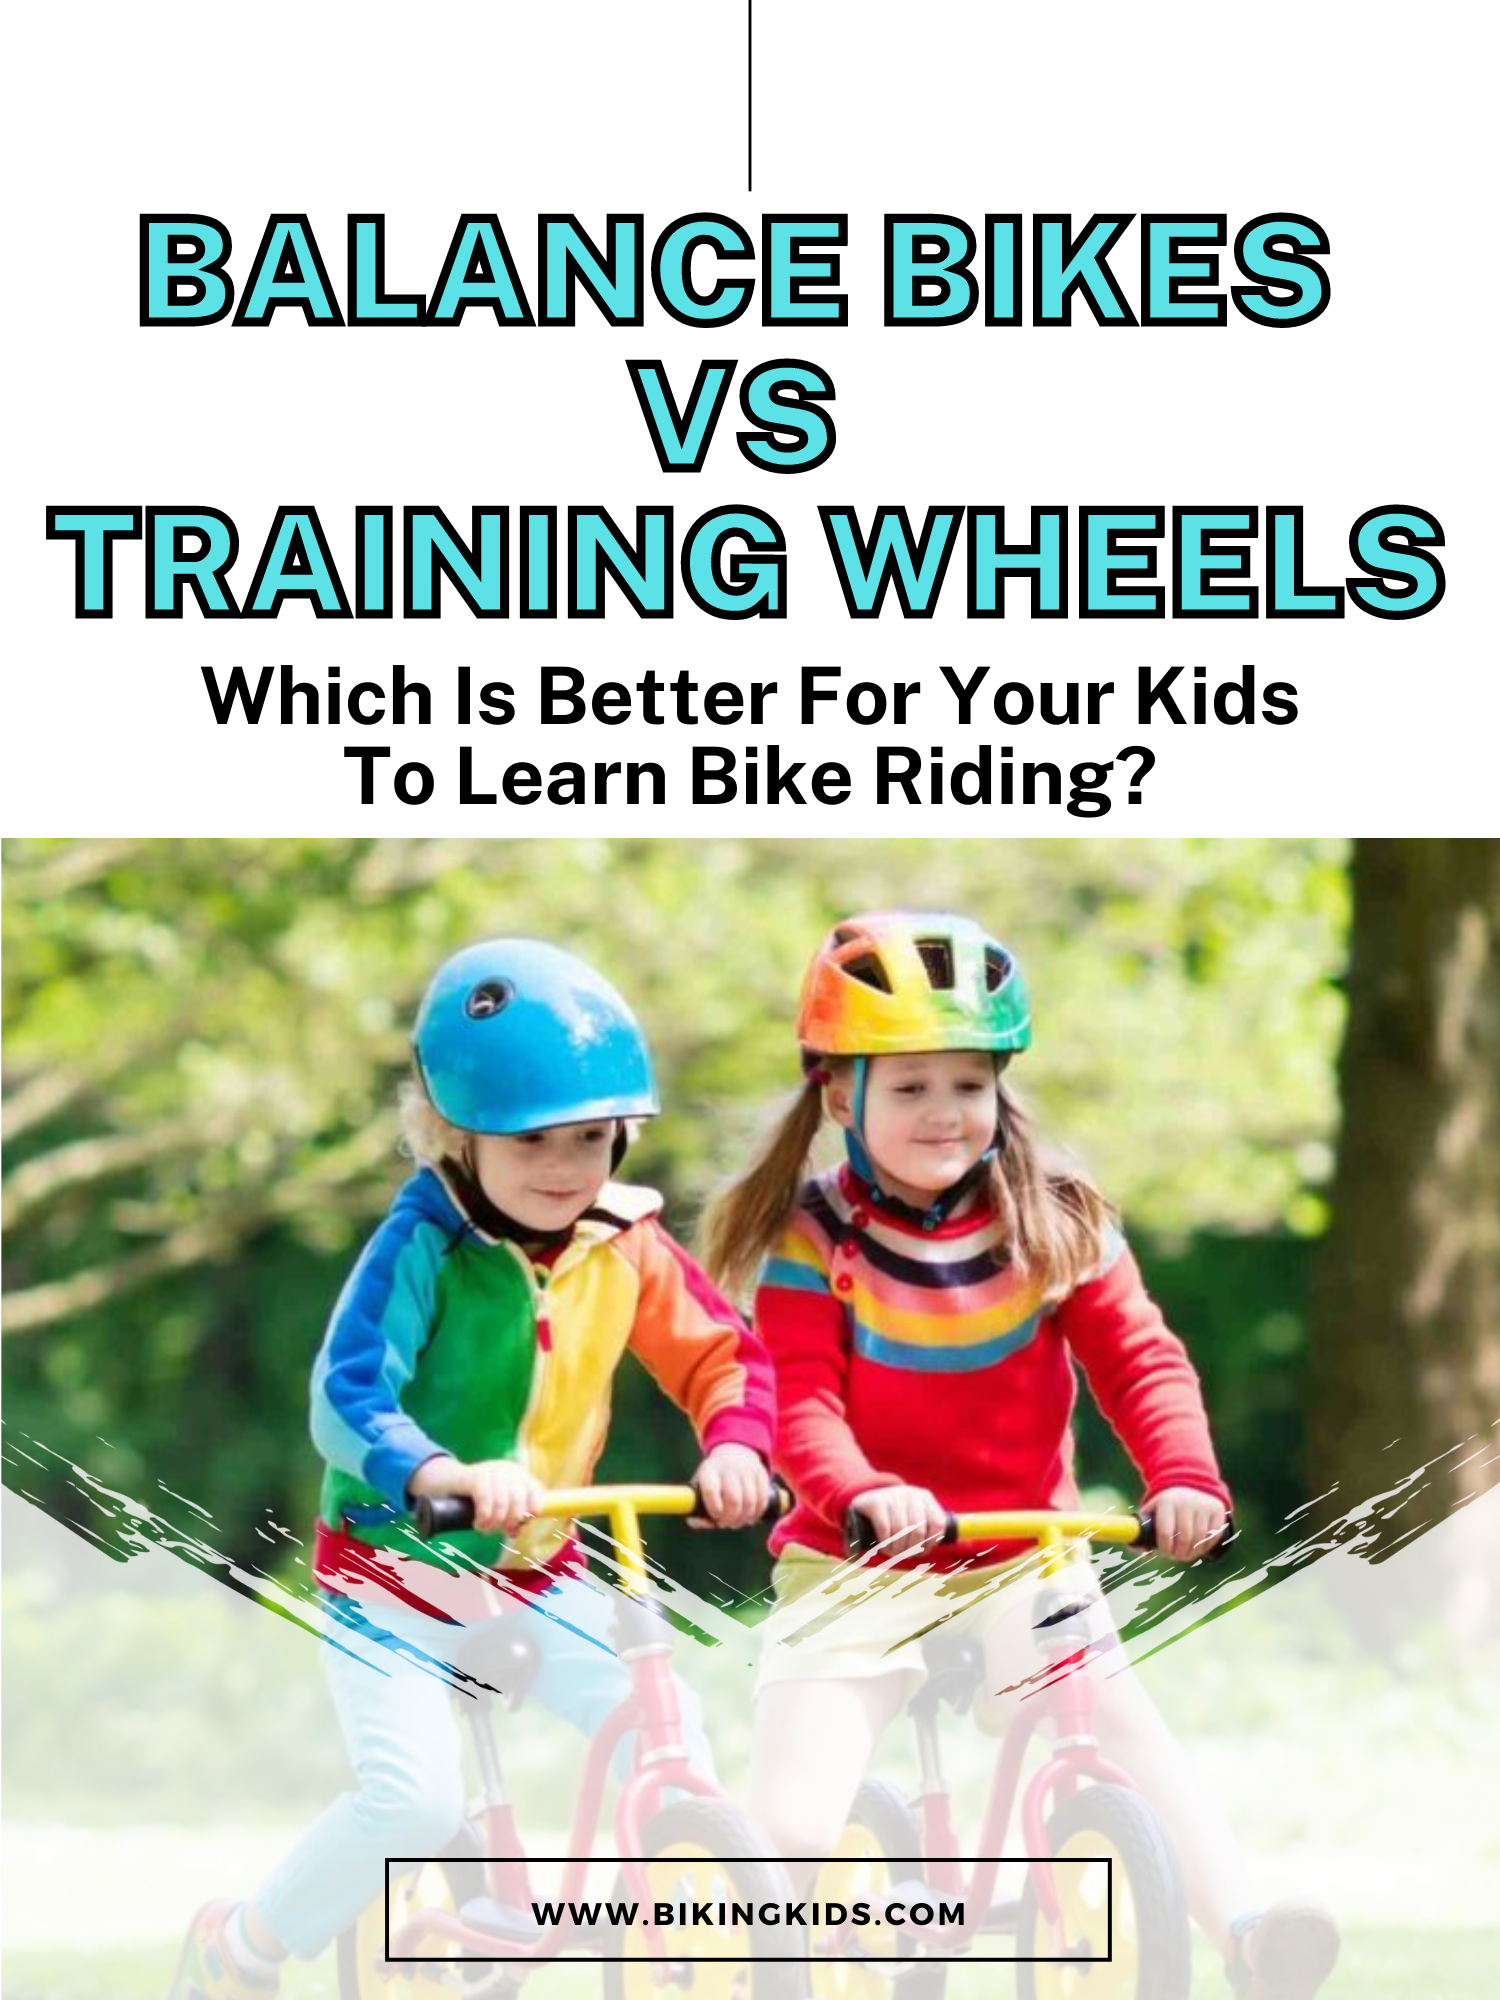 balance bikes vs training wheels-- which is the best way to learn bike riding?